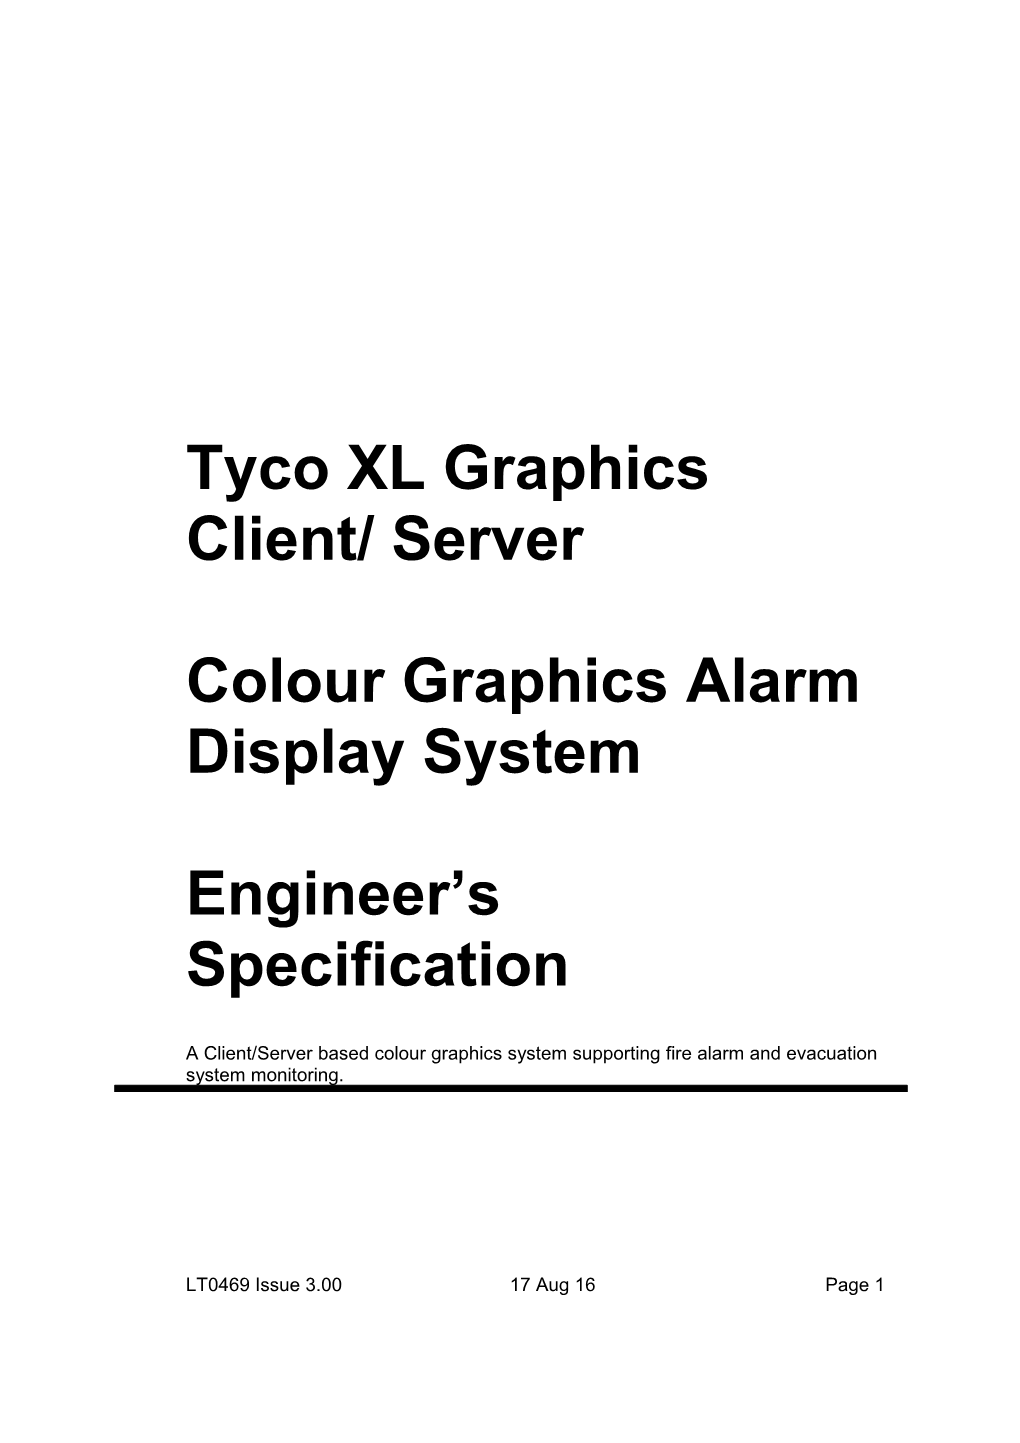 Lt0469 Tyco Xl Graphics Client/Server Engineer's Specification